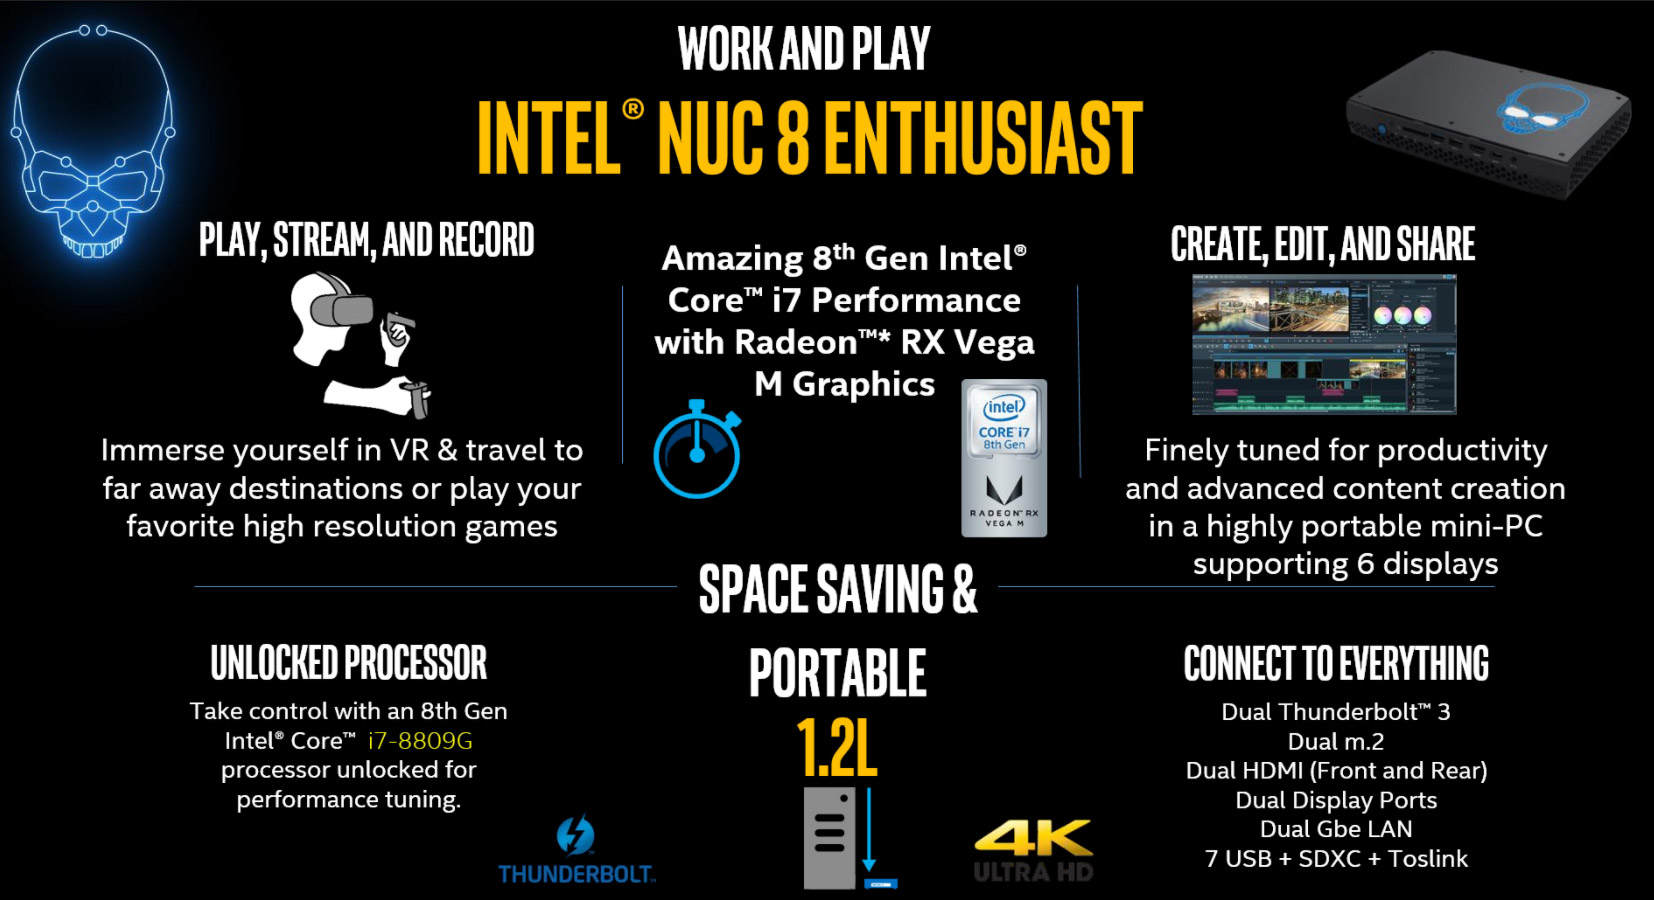 Intel NUC Goes Hades Canyon - Check Out The NUC8i7HVK and